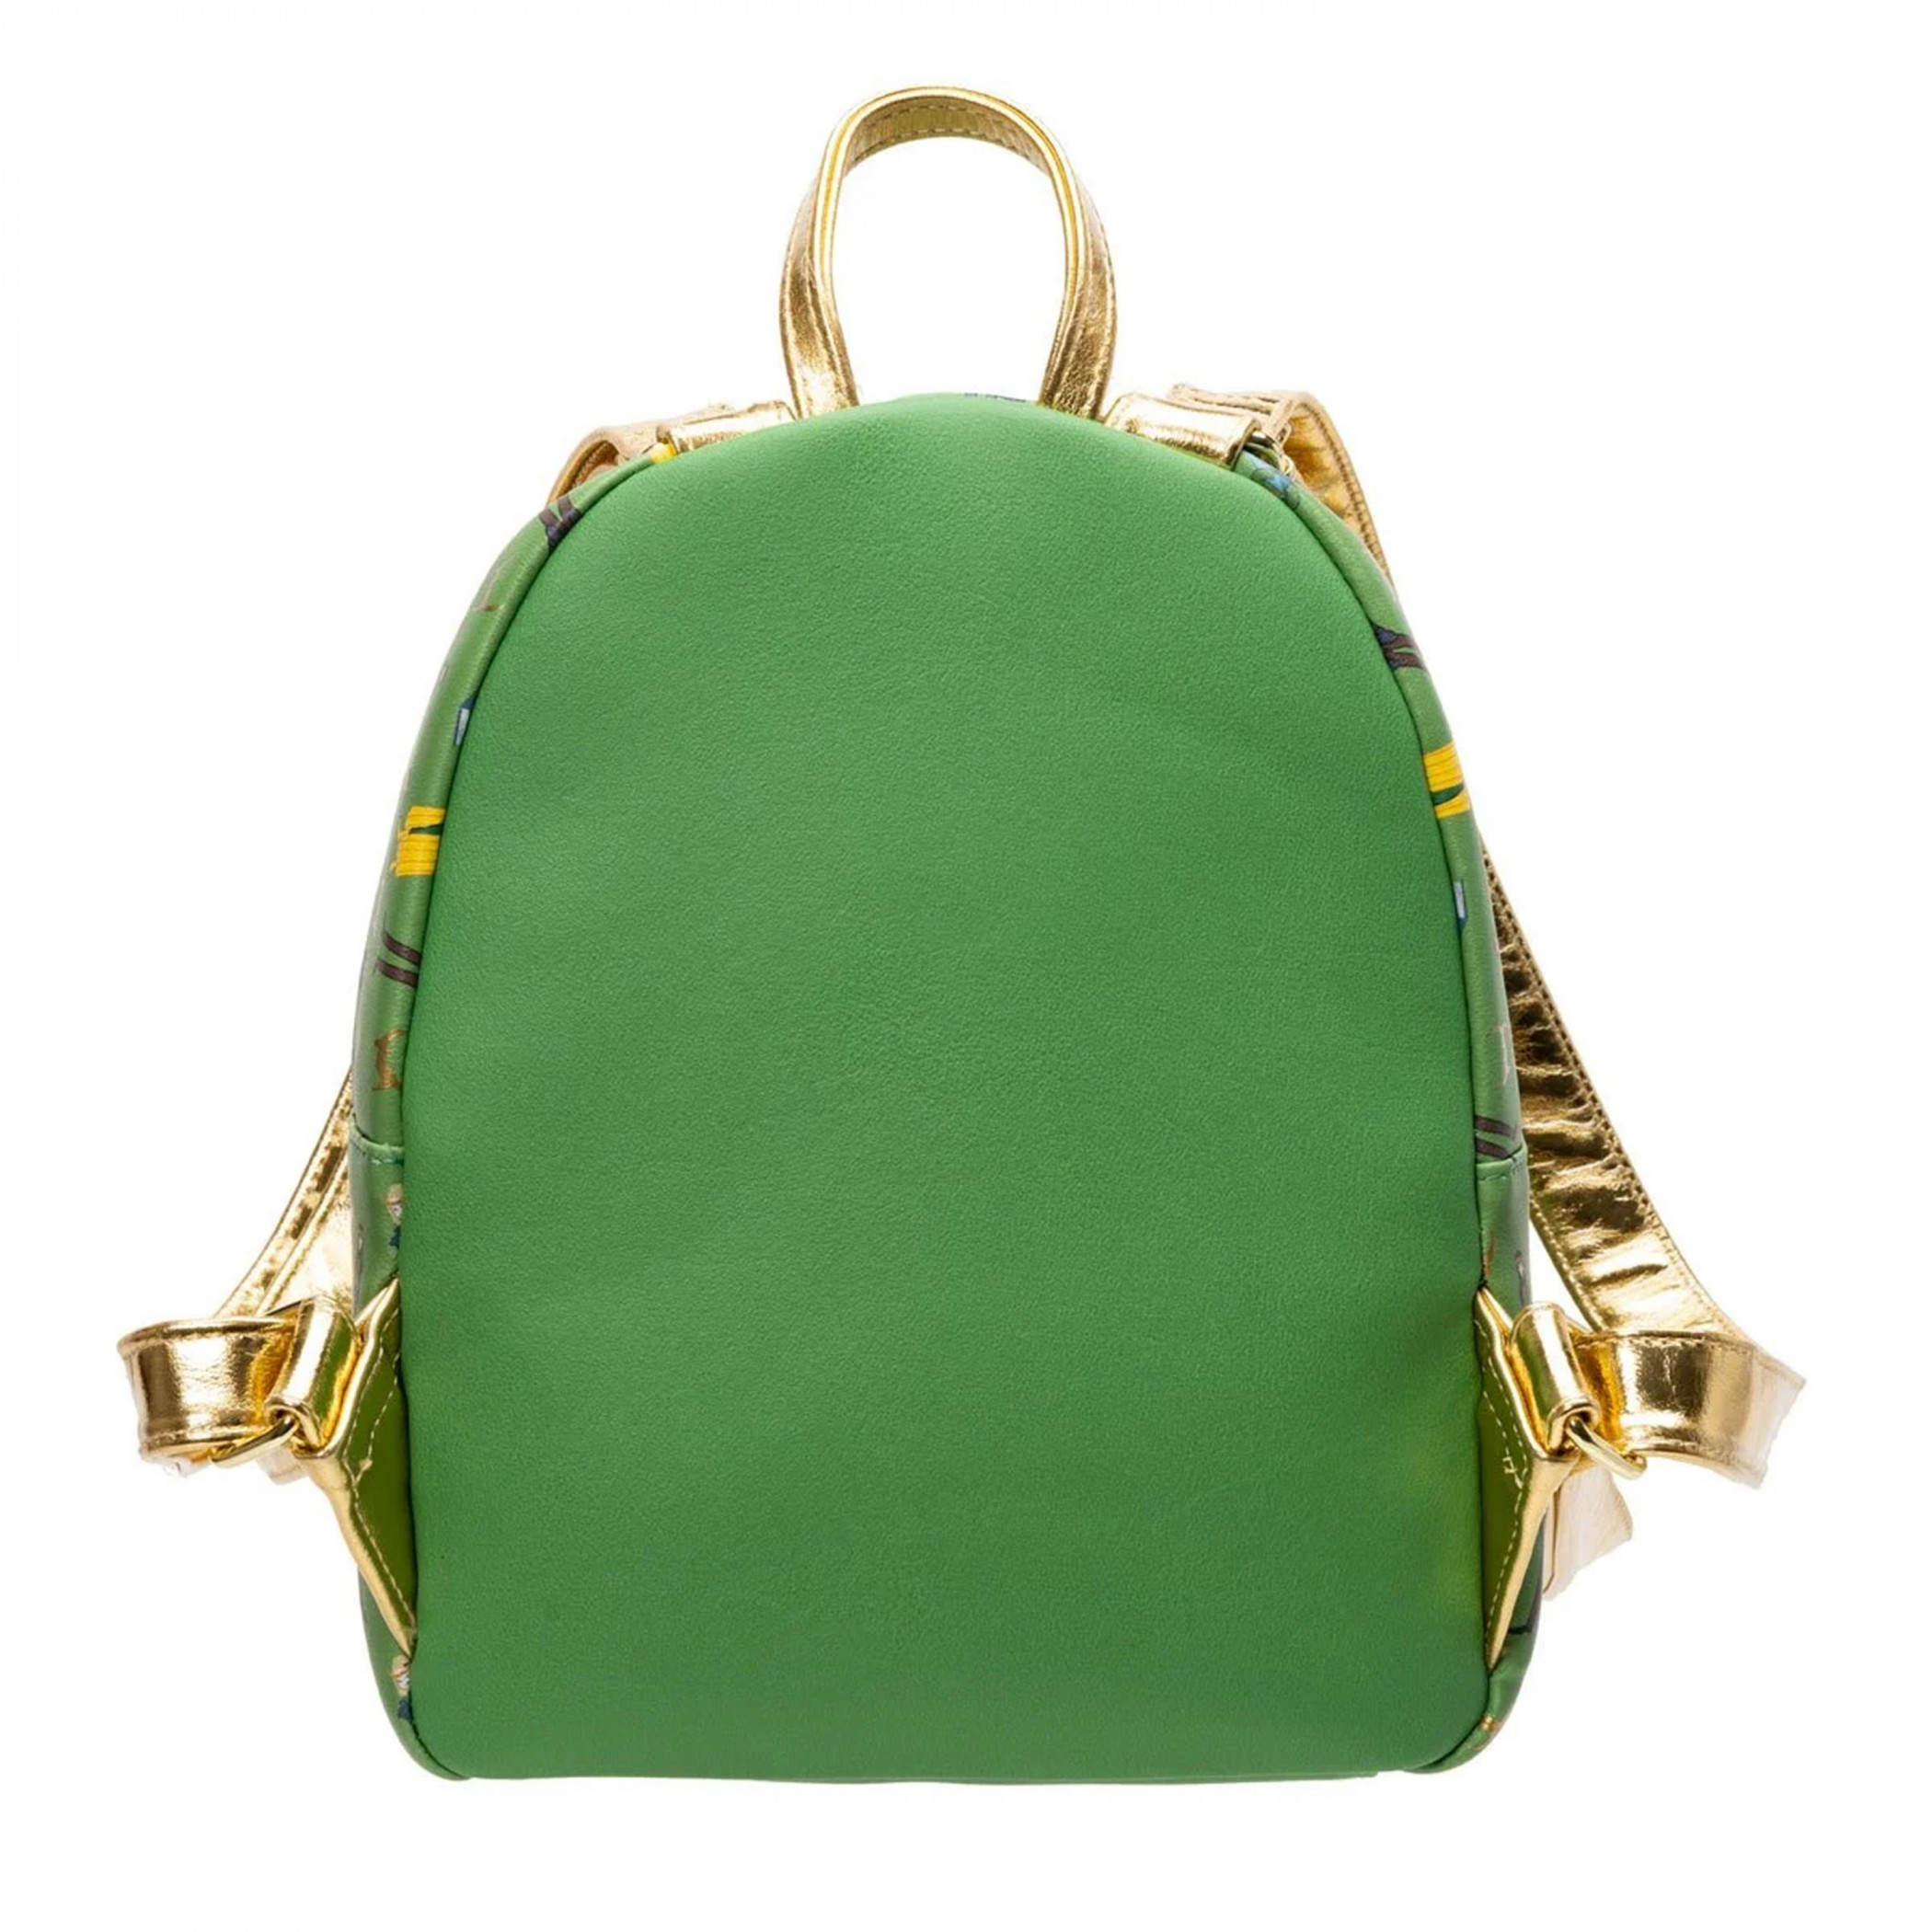 Loki Multiverse Variants Mini-Backpack By Loungefly